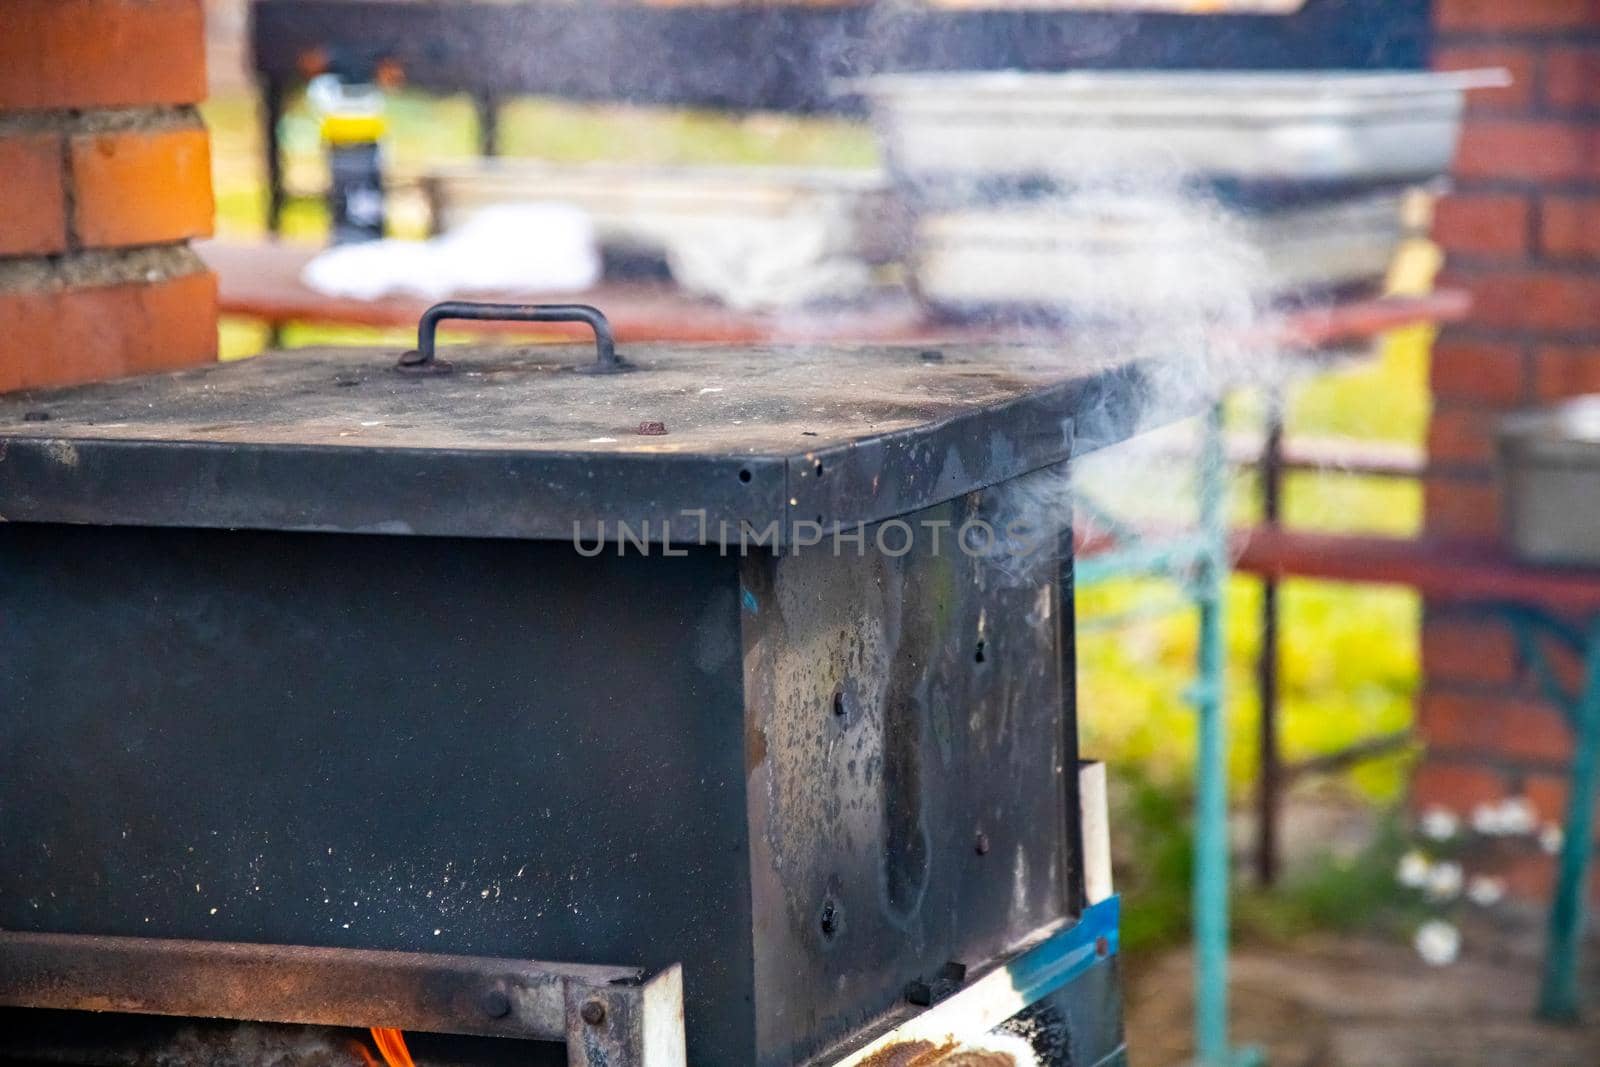 the process of smoking fish or meat. outdoor smoker for fish and meat. smoke comes from a black box for preparing smoked food.